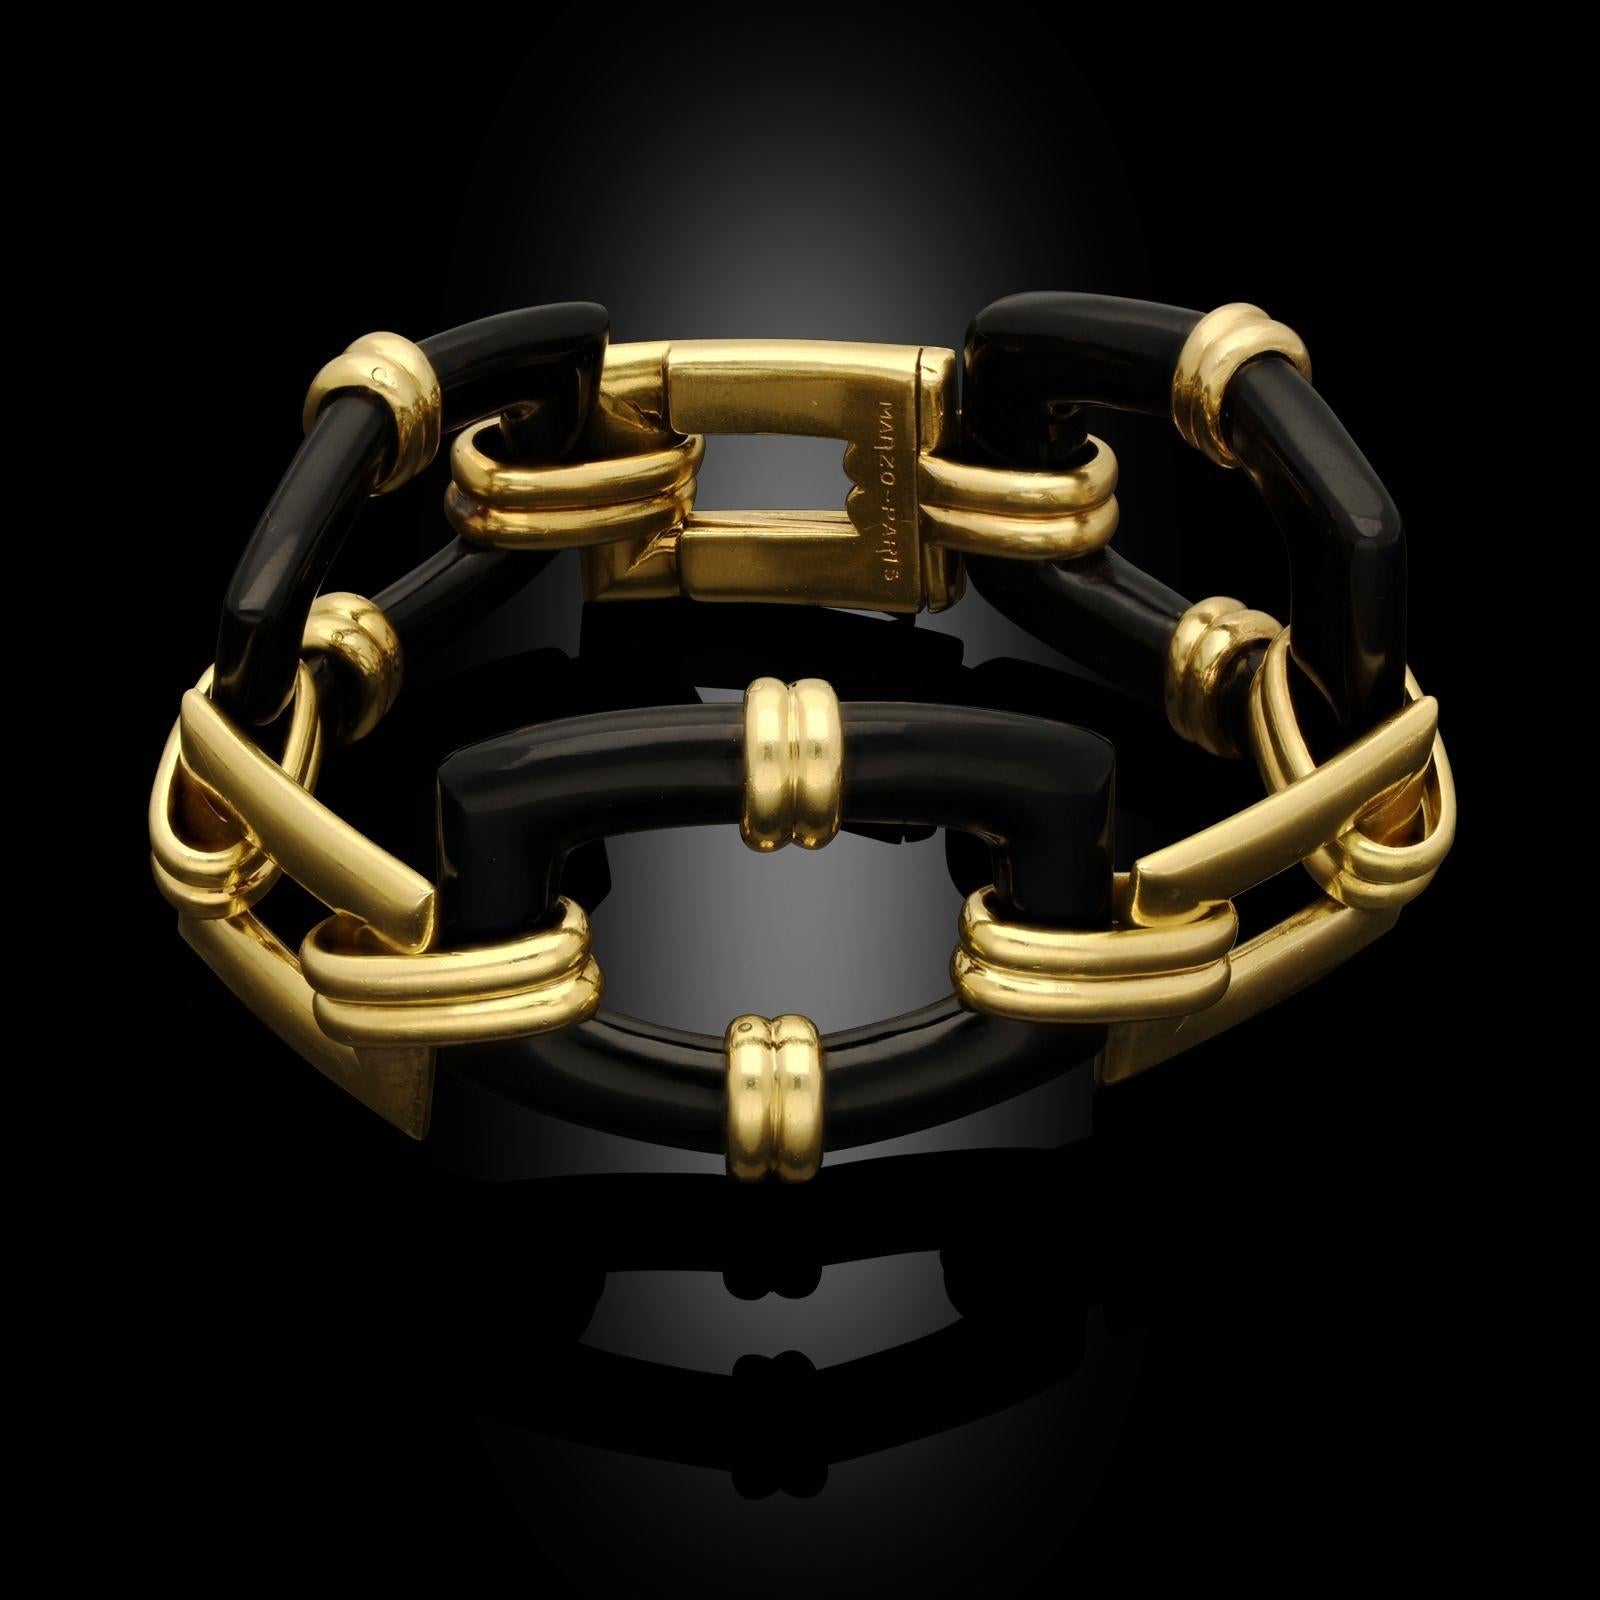 A Retro 18ct yellow gold and onyx bracelet by Georges Lenfant for Marzo, circa 1950. The bracelet is made up of alternating 18ct yellow gold and polished black onyx rectangular panels and connect with a concealed tongue and clasp.
Maker
Marzo -